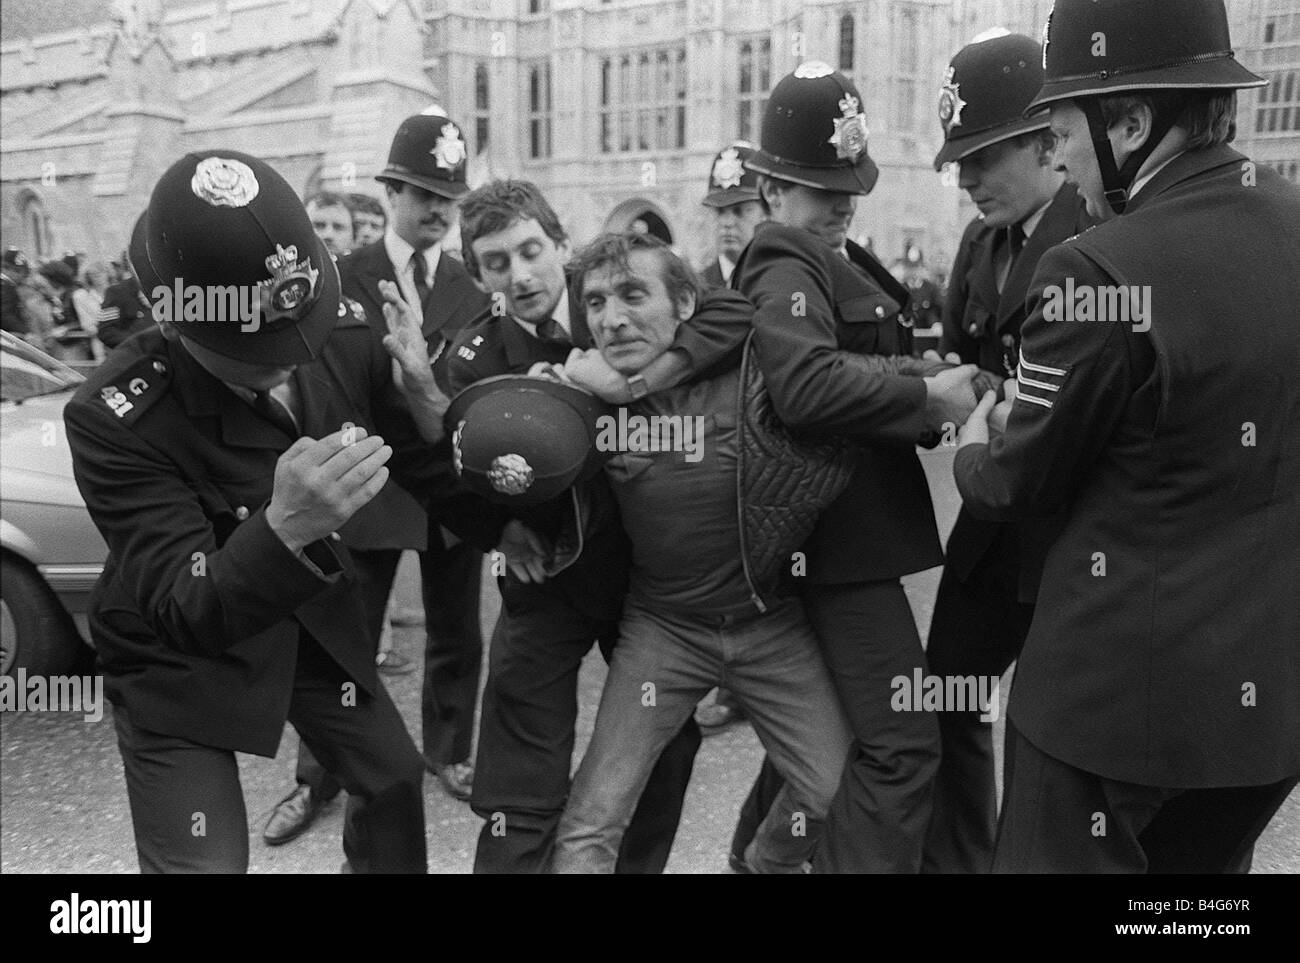 1980s london police Black and White Stock Photos & Images - Alamy